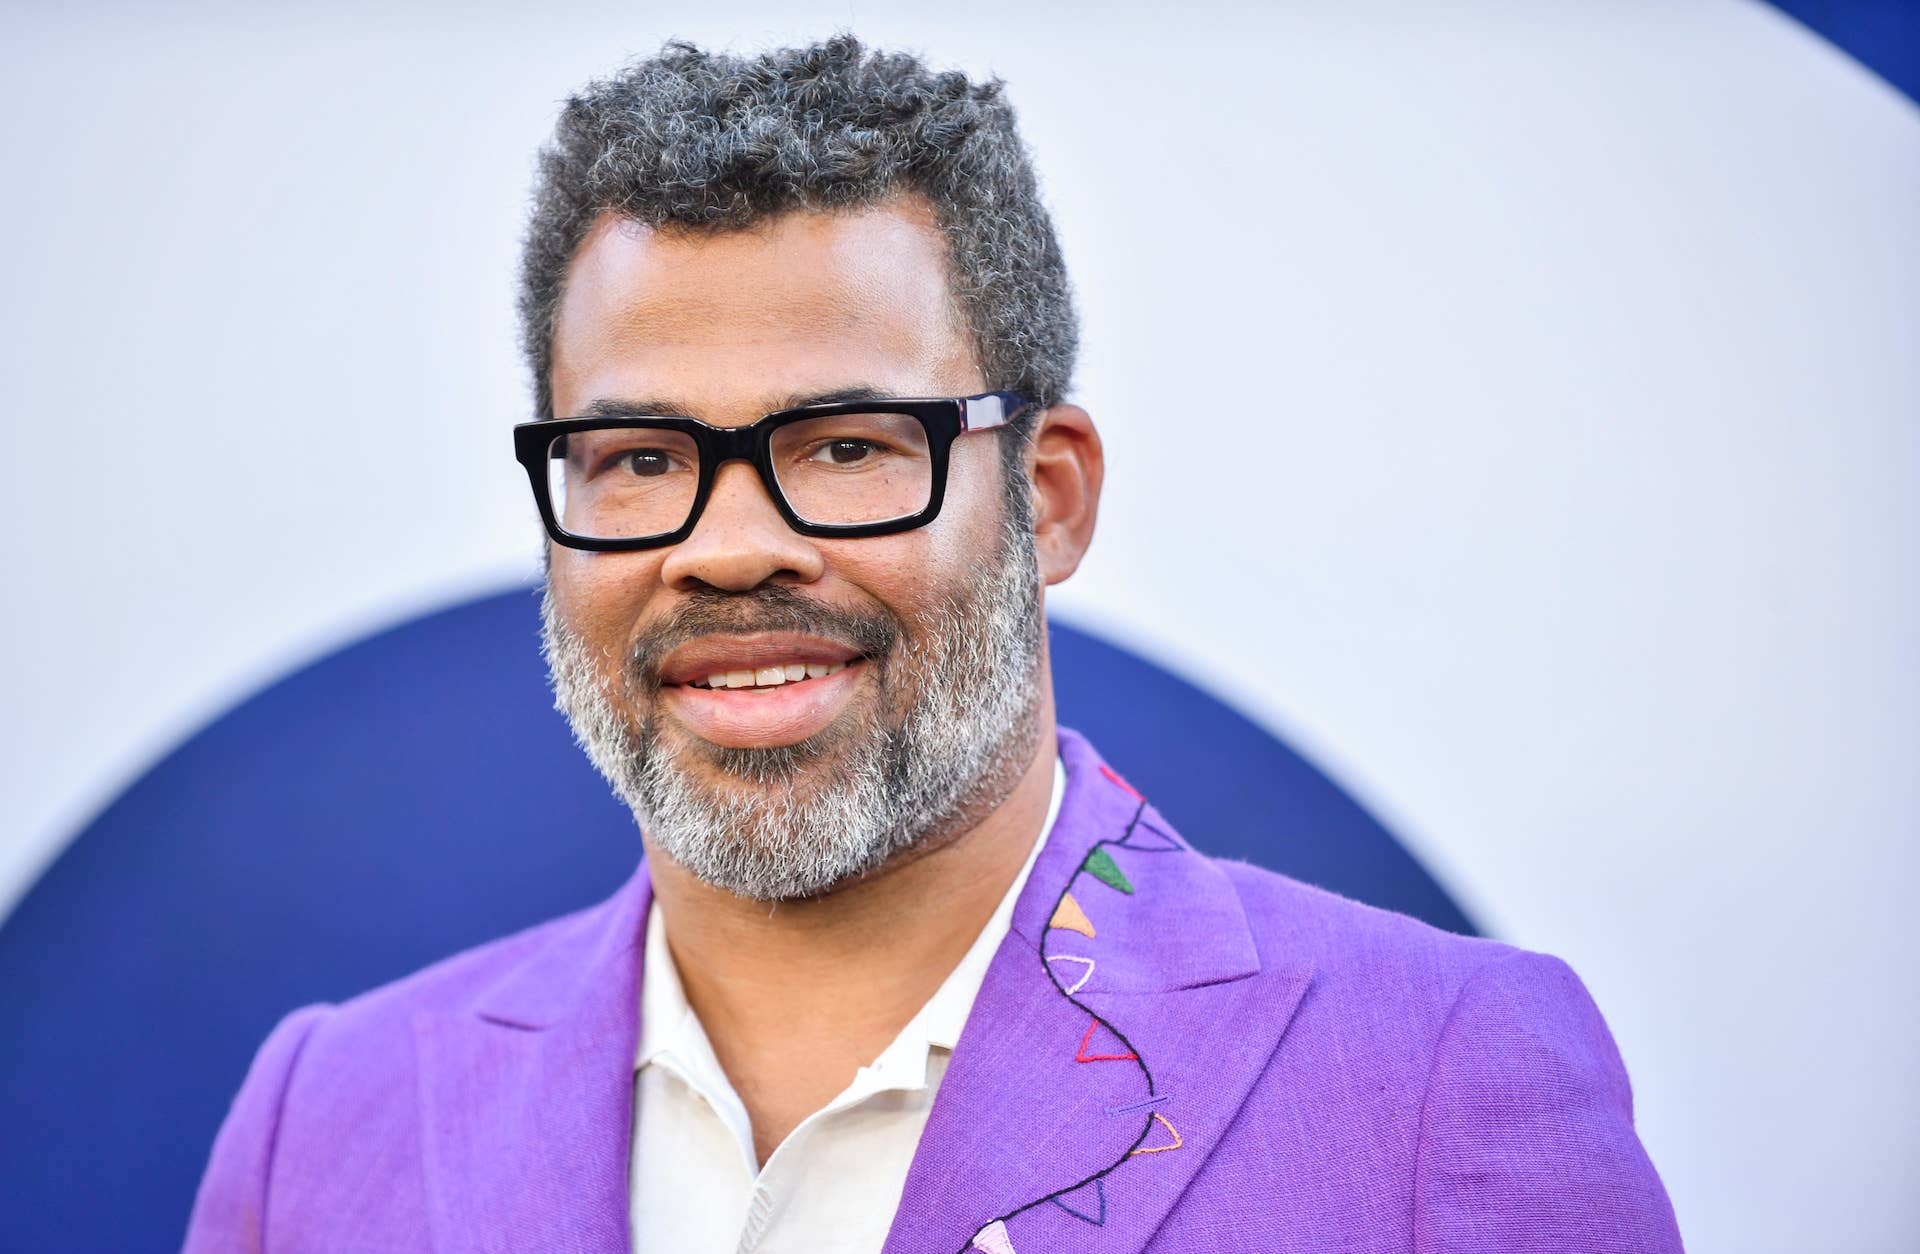 Jordan Peele Teases Fourth Film, Says it ‘Could Be My Favorite Movie if I Make It Right’